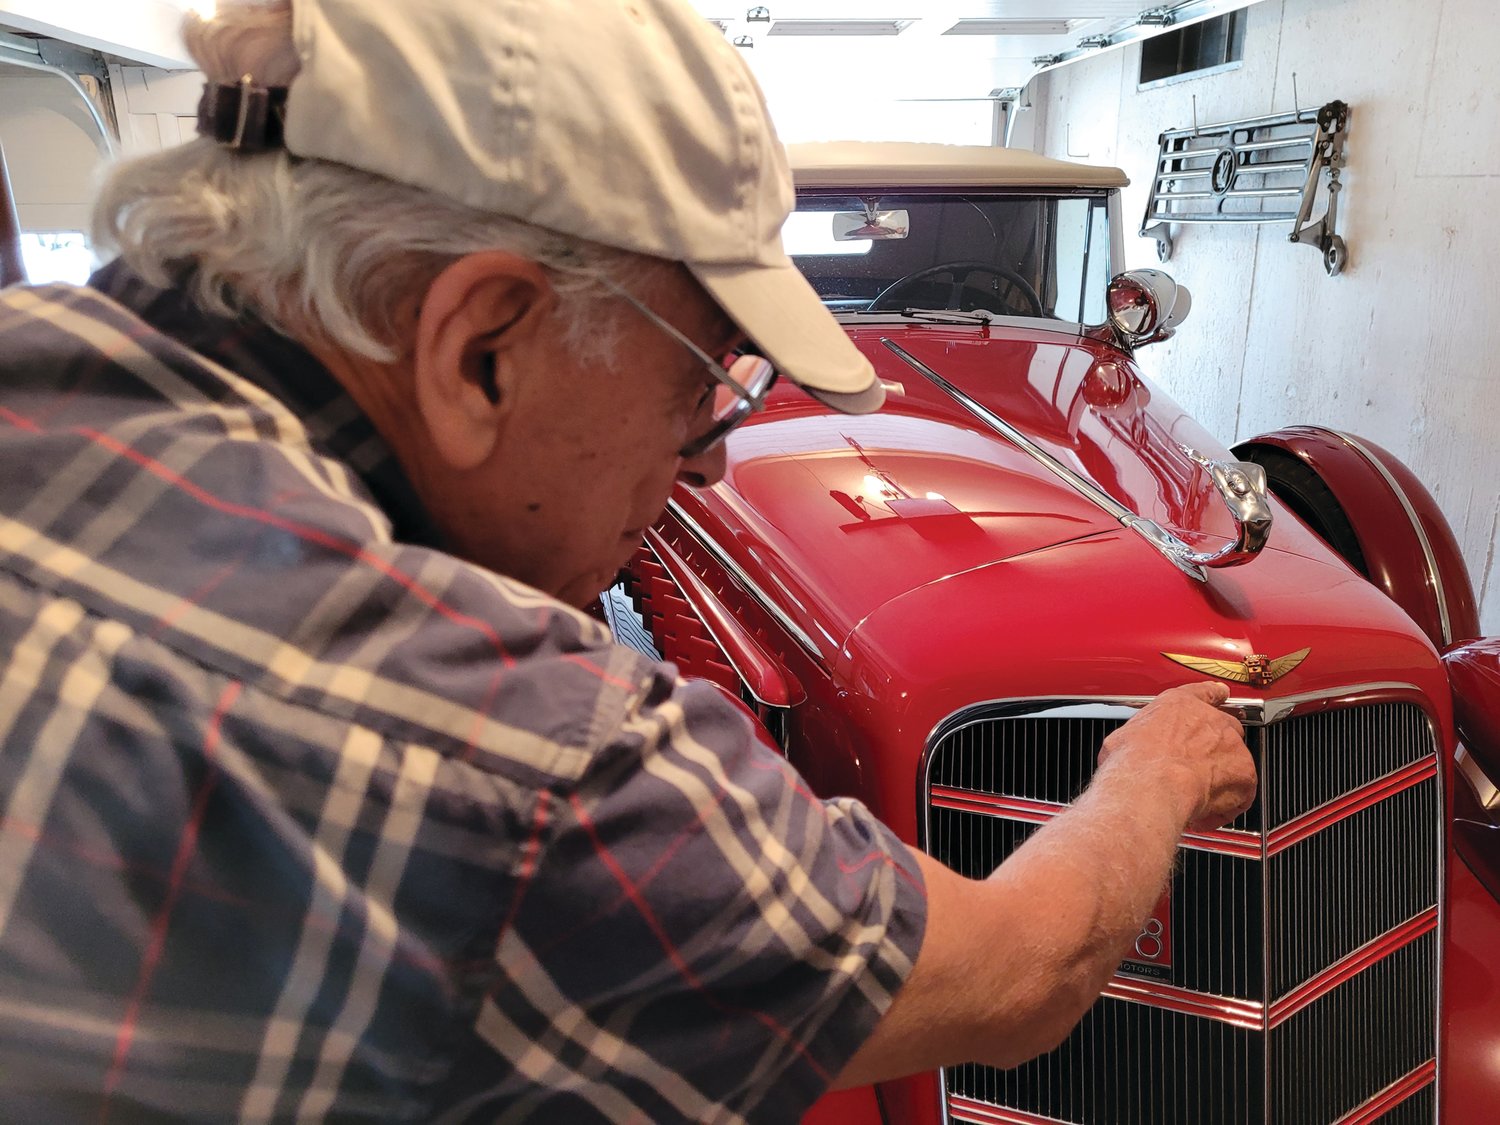 SHOWSTOPPER: John Ricci points out the details that differentiate his 1934 Cadillac from the far more common 1935 model; a slightly different hood ornament, the grill’s mesh bottom, and the bi-plane and bullet bumpers.